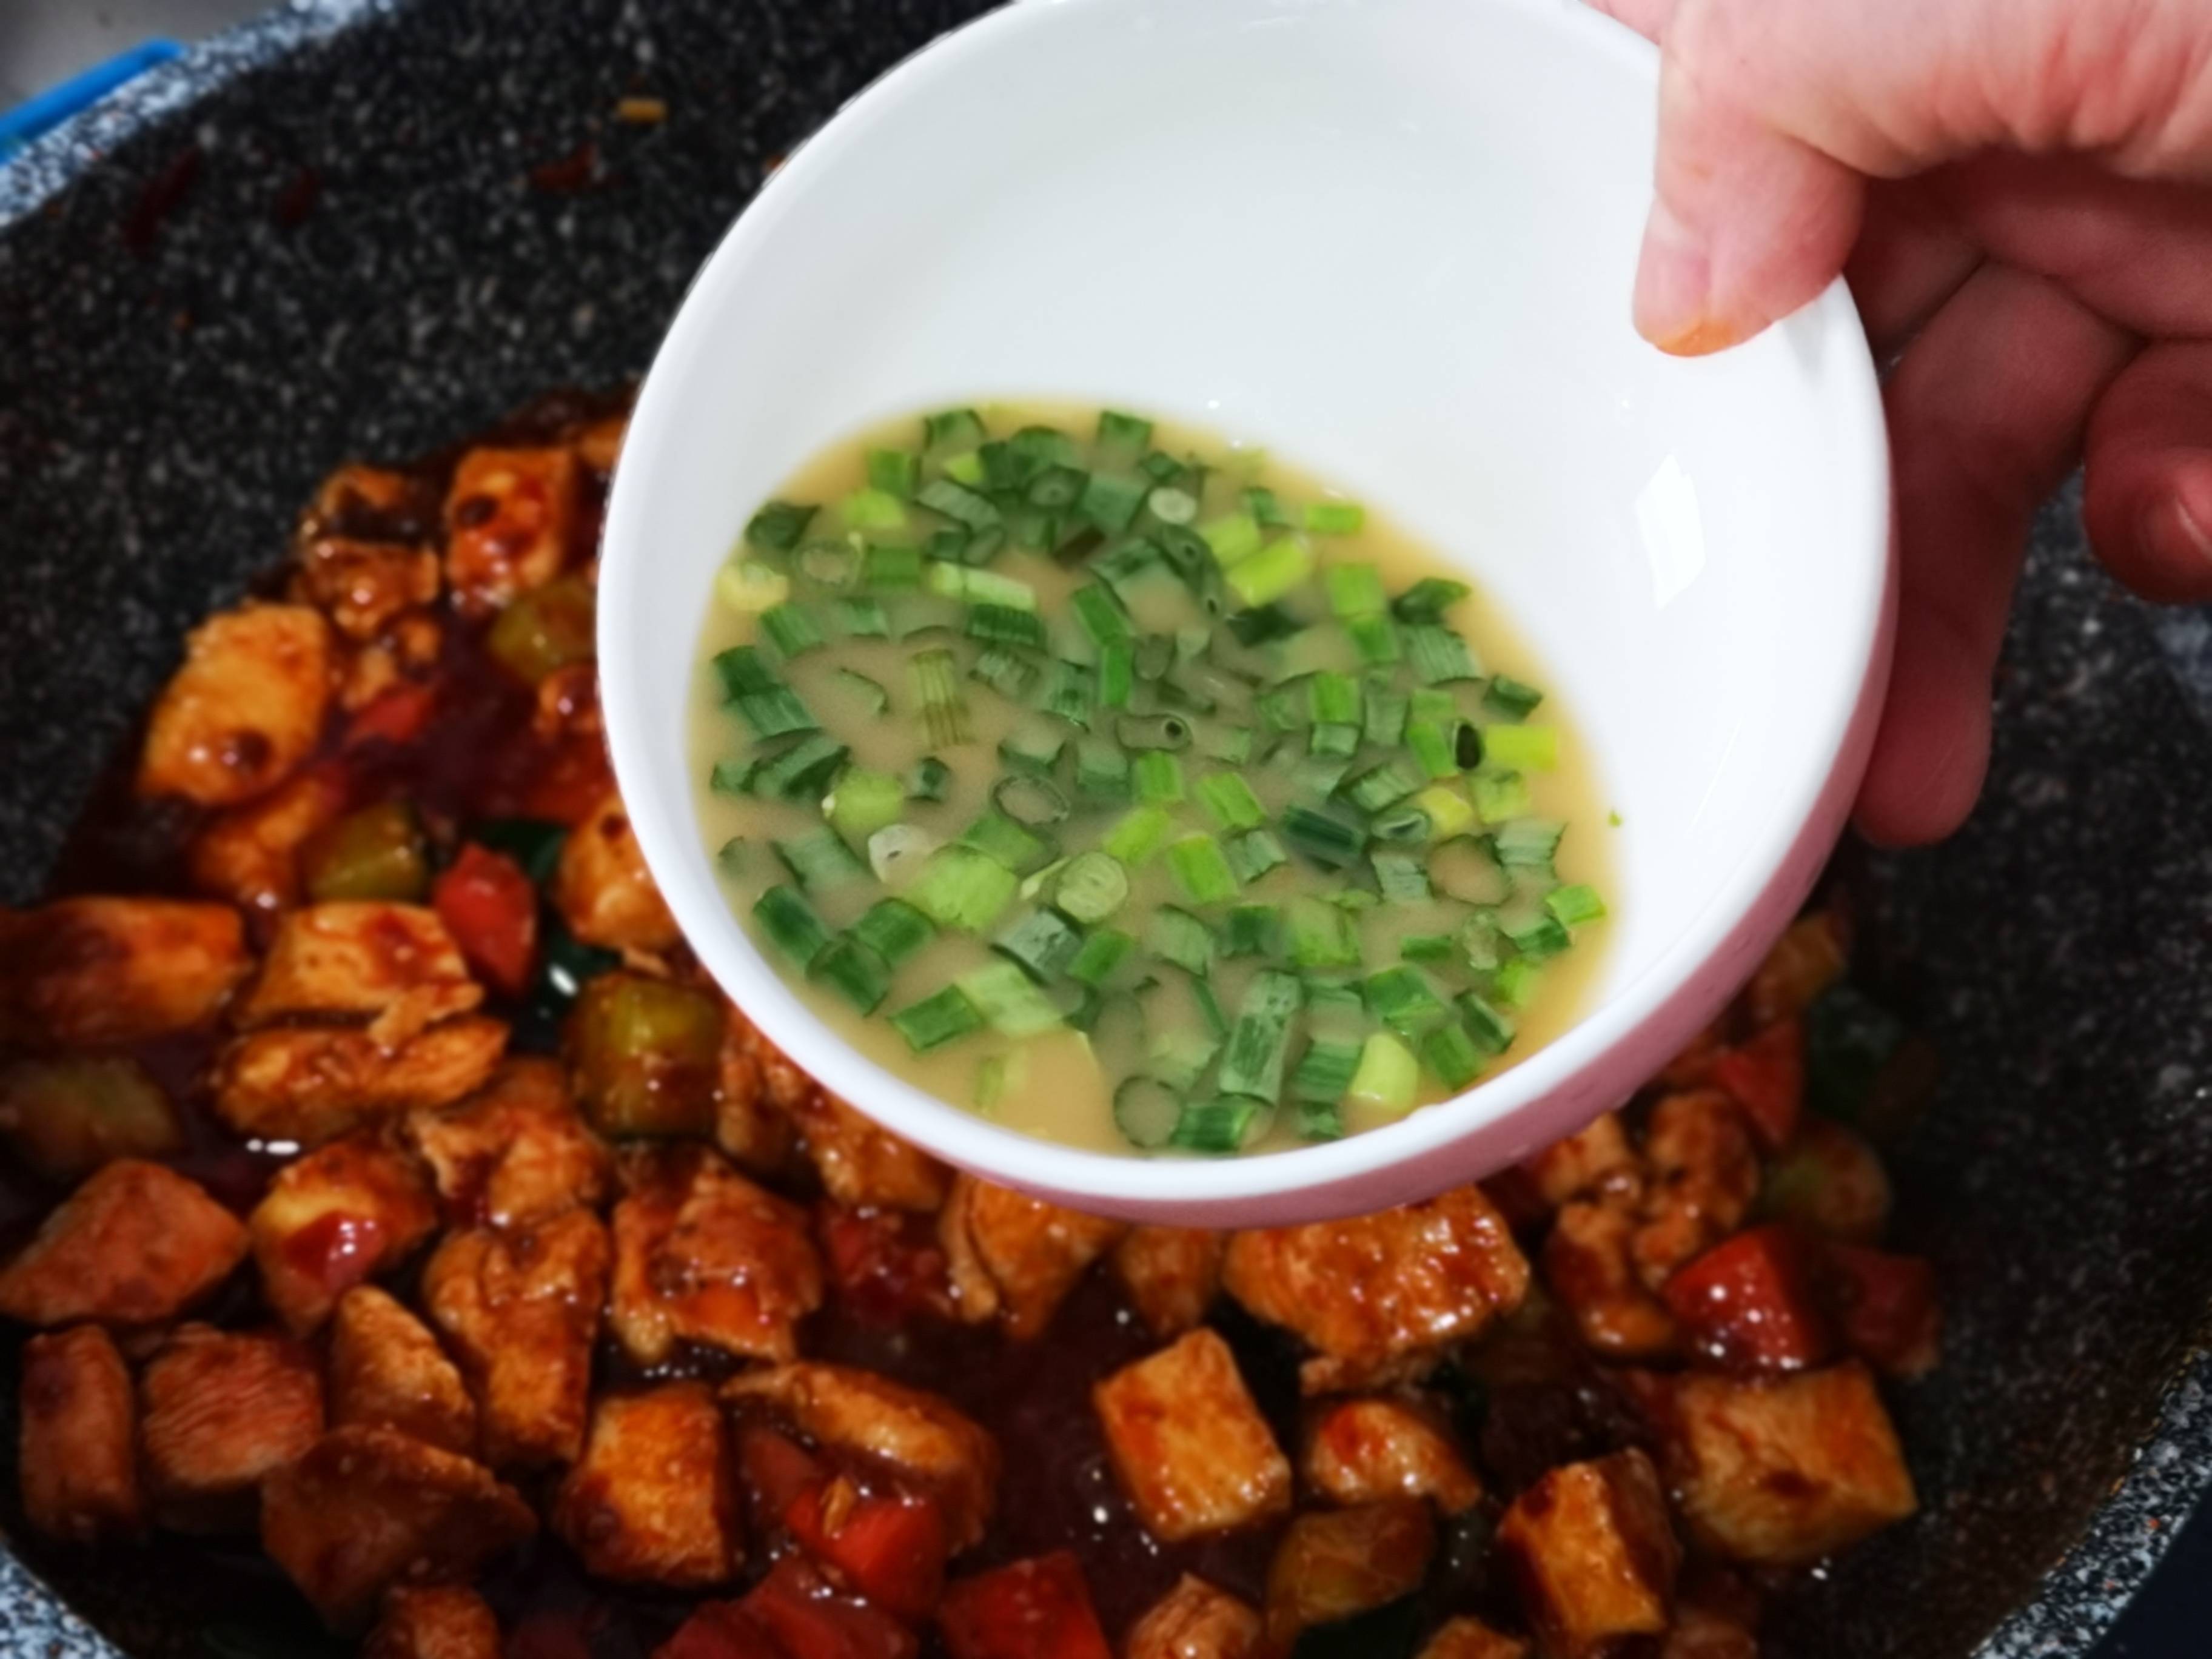 Big Meal! Kung Pao Chicken recipe